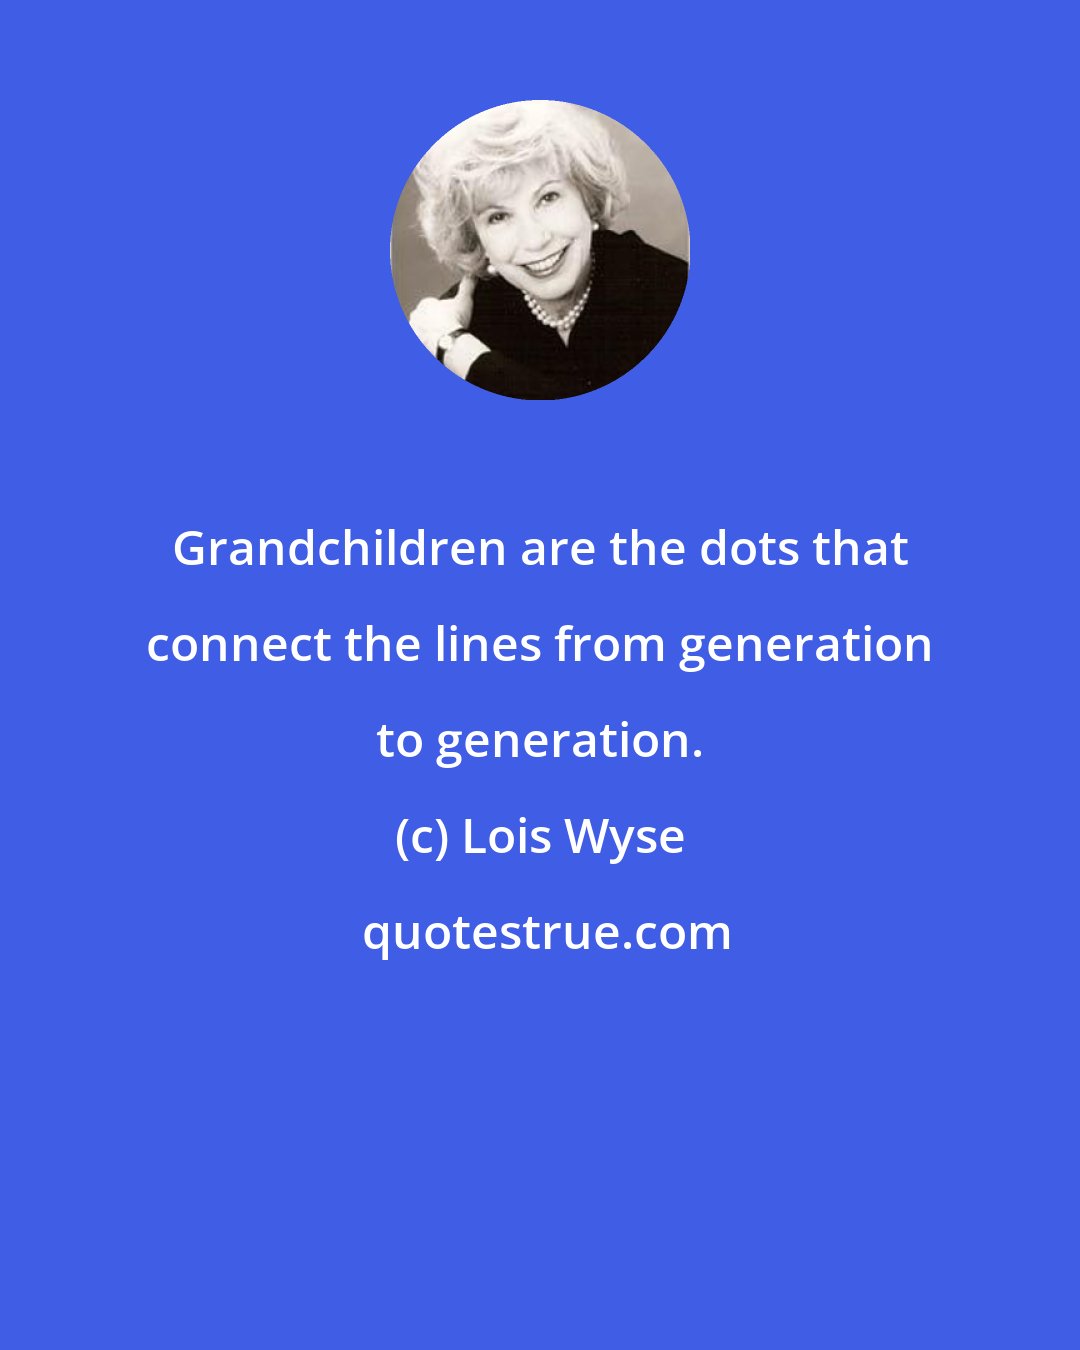 Lois Wyse: Grandchildren are the dots that connect the lines from generation to generation.